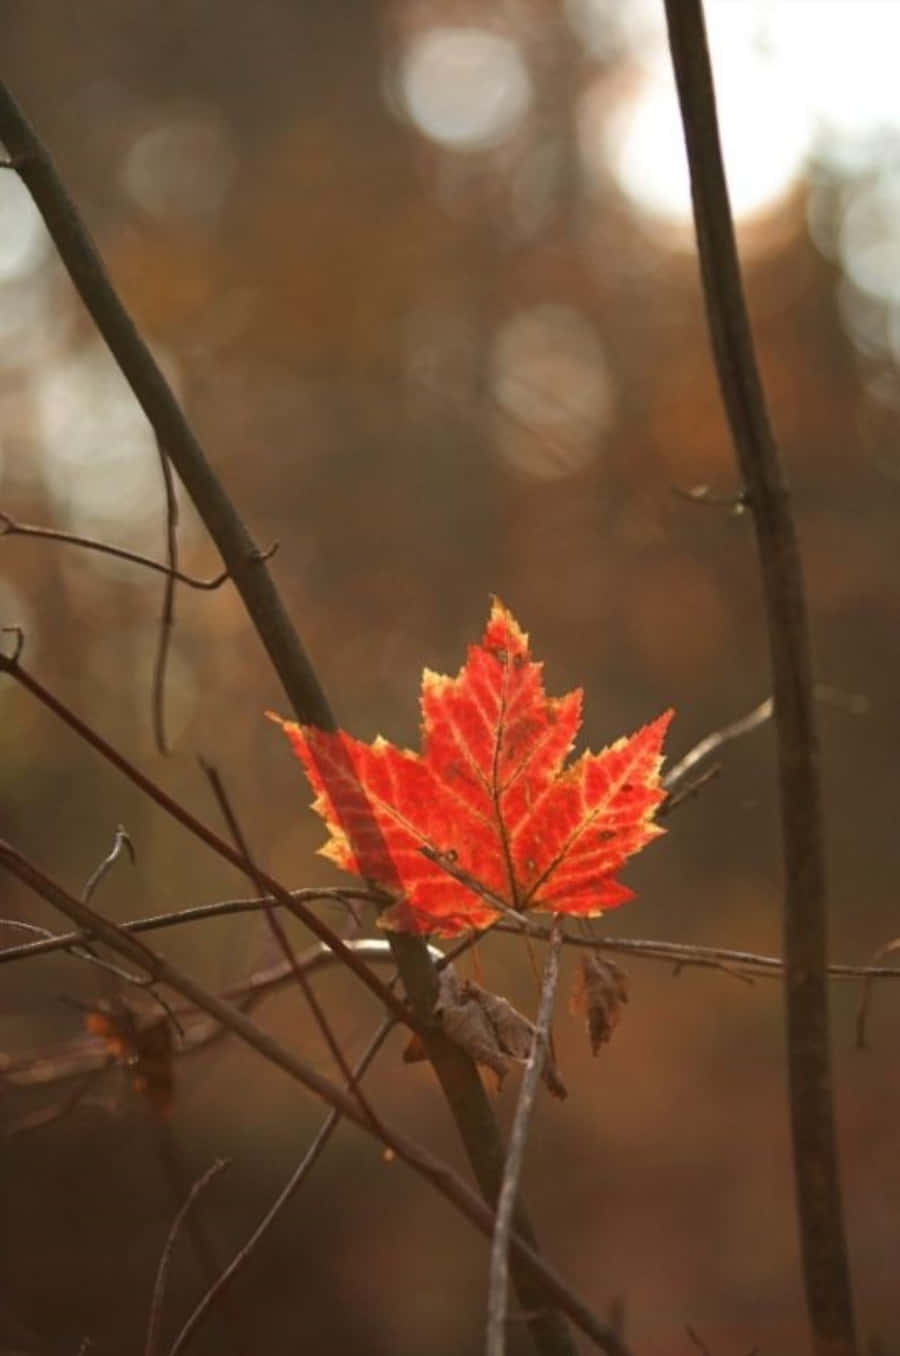 The Autumn Beauty of the Maple Leaf